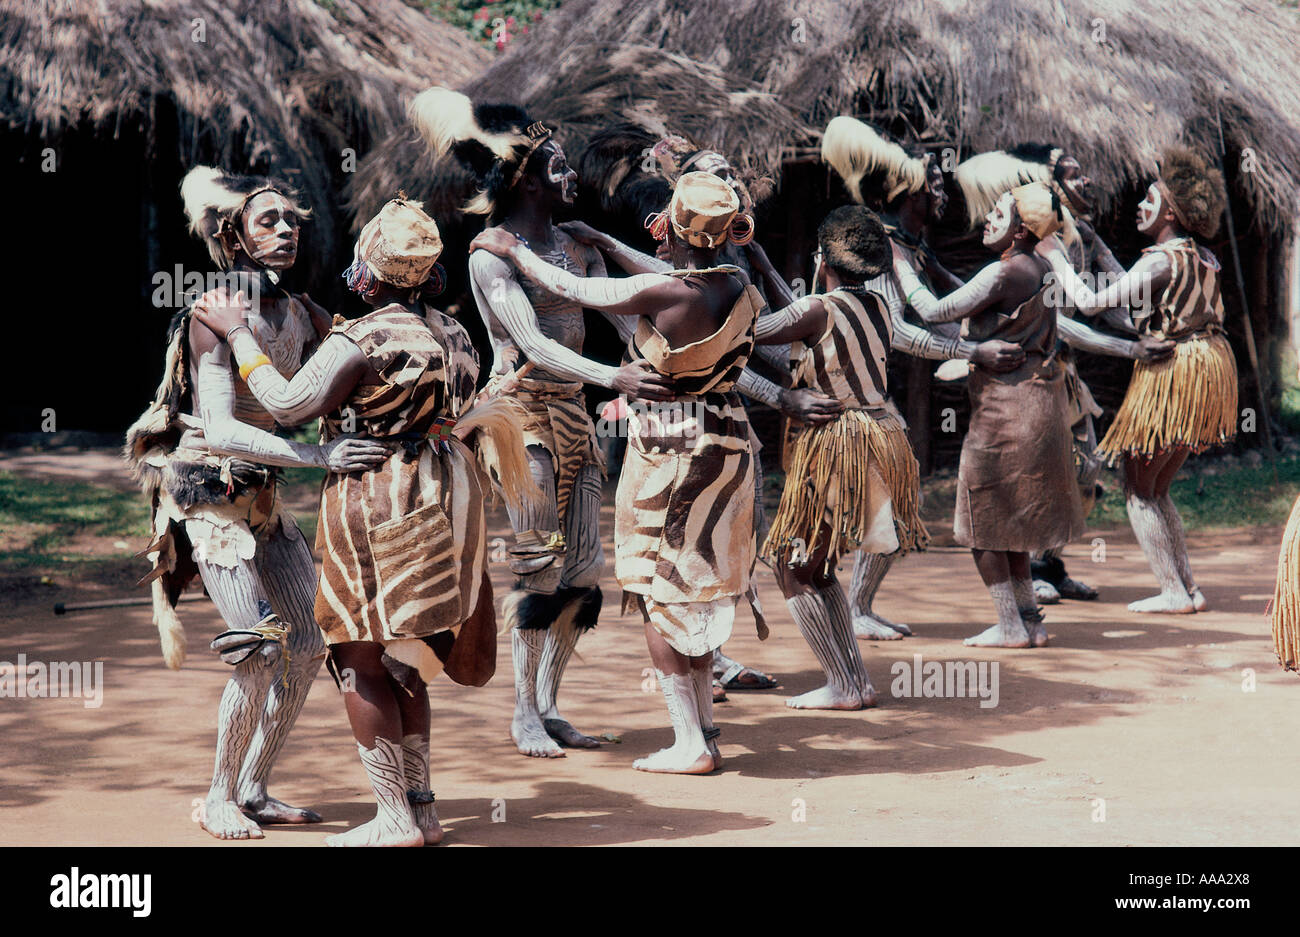 Group Of Kikuyu Men And Women Dancing In Traditional Dress Central